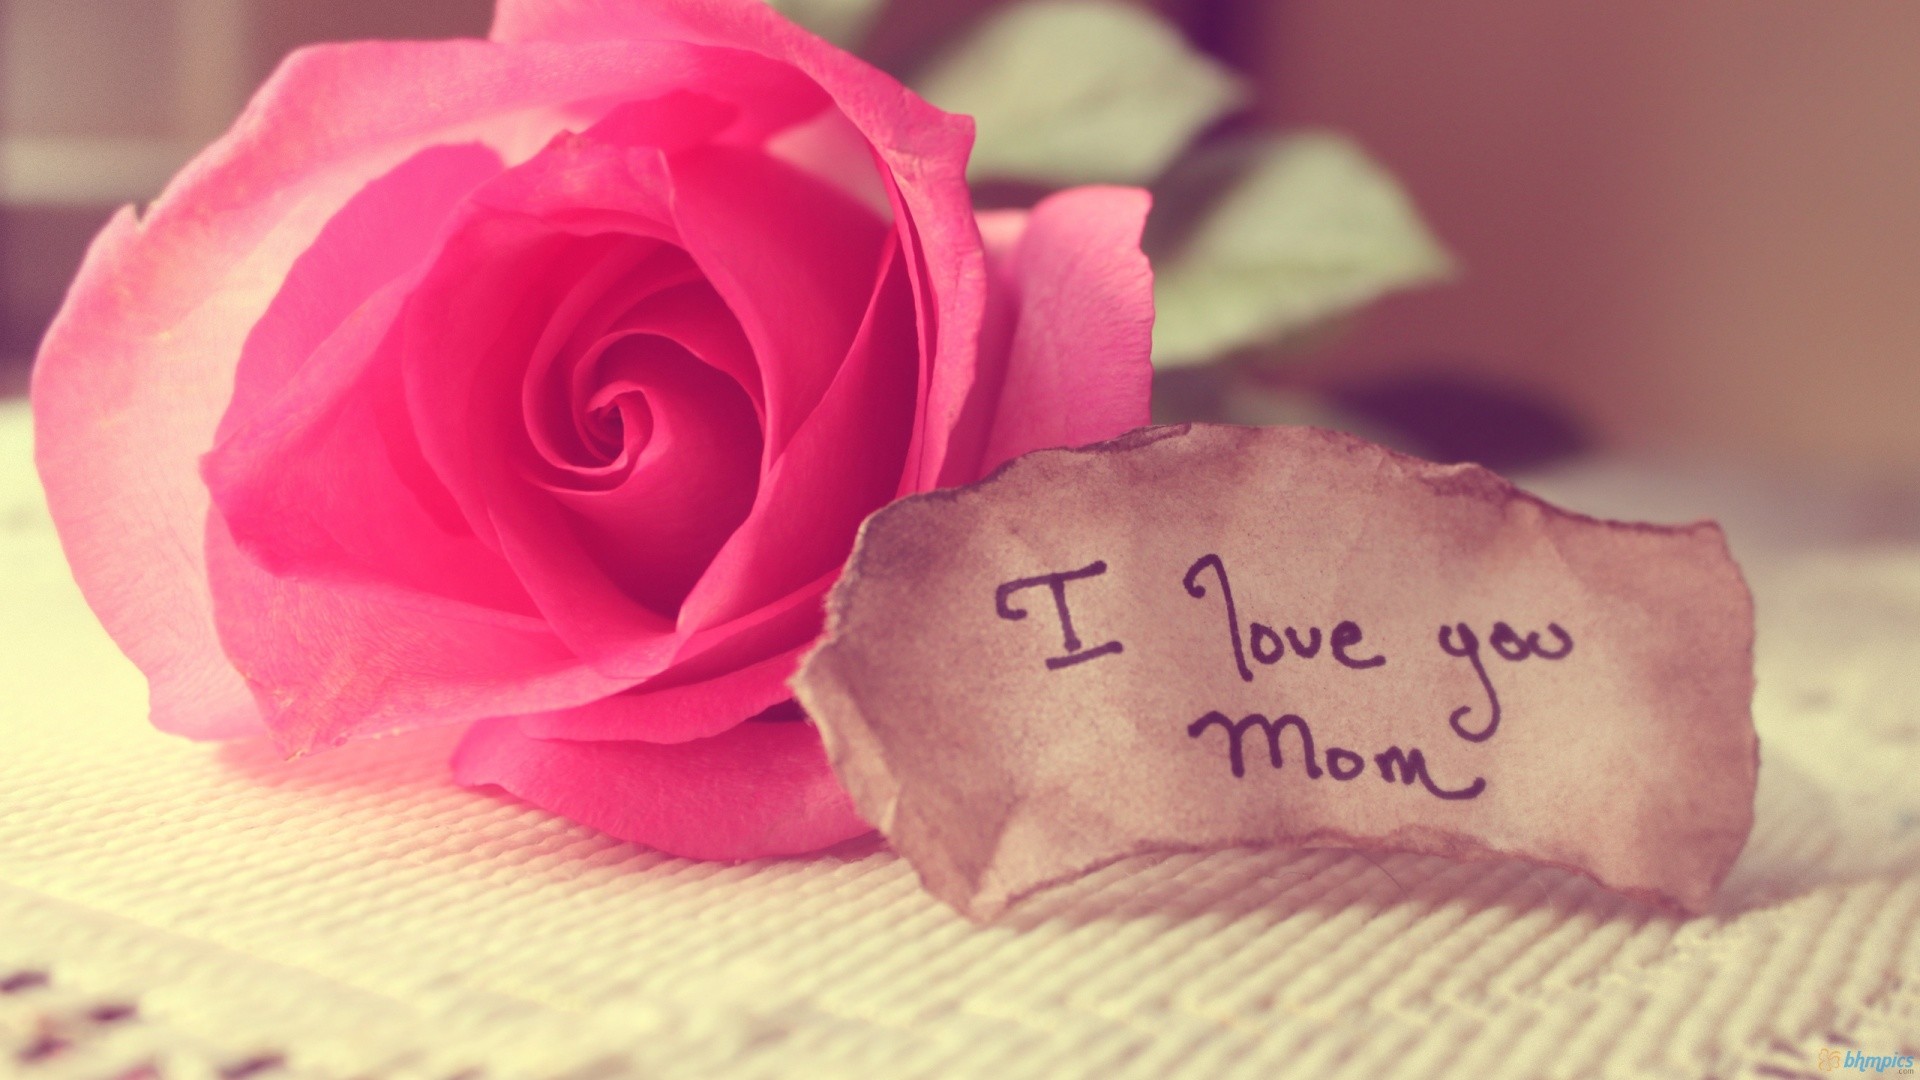 1920x1080 mothers day i love you mom wallpaper hd desktop wallpapers 4k high  definition windows 10 mac apple colourful images backgrounds free 1920Ã1080 Wallpaper  HD